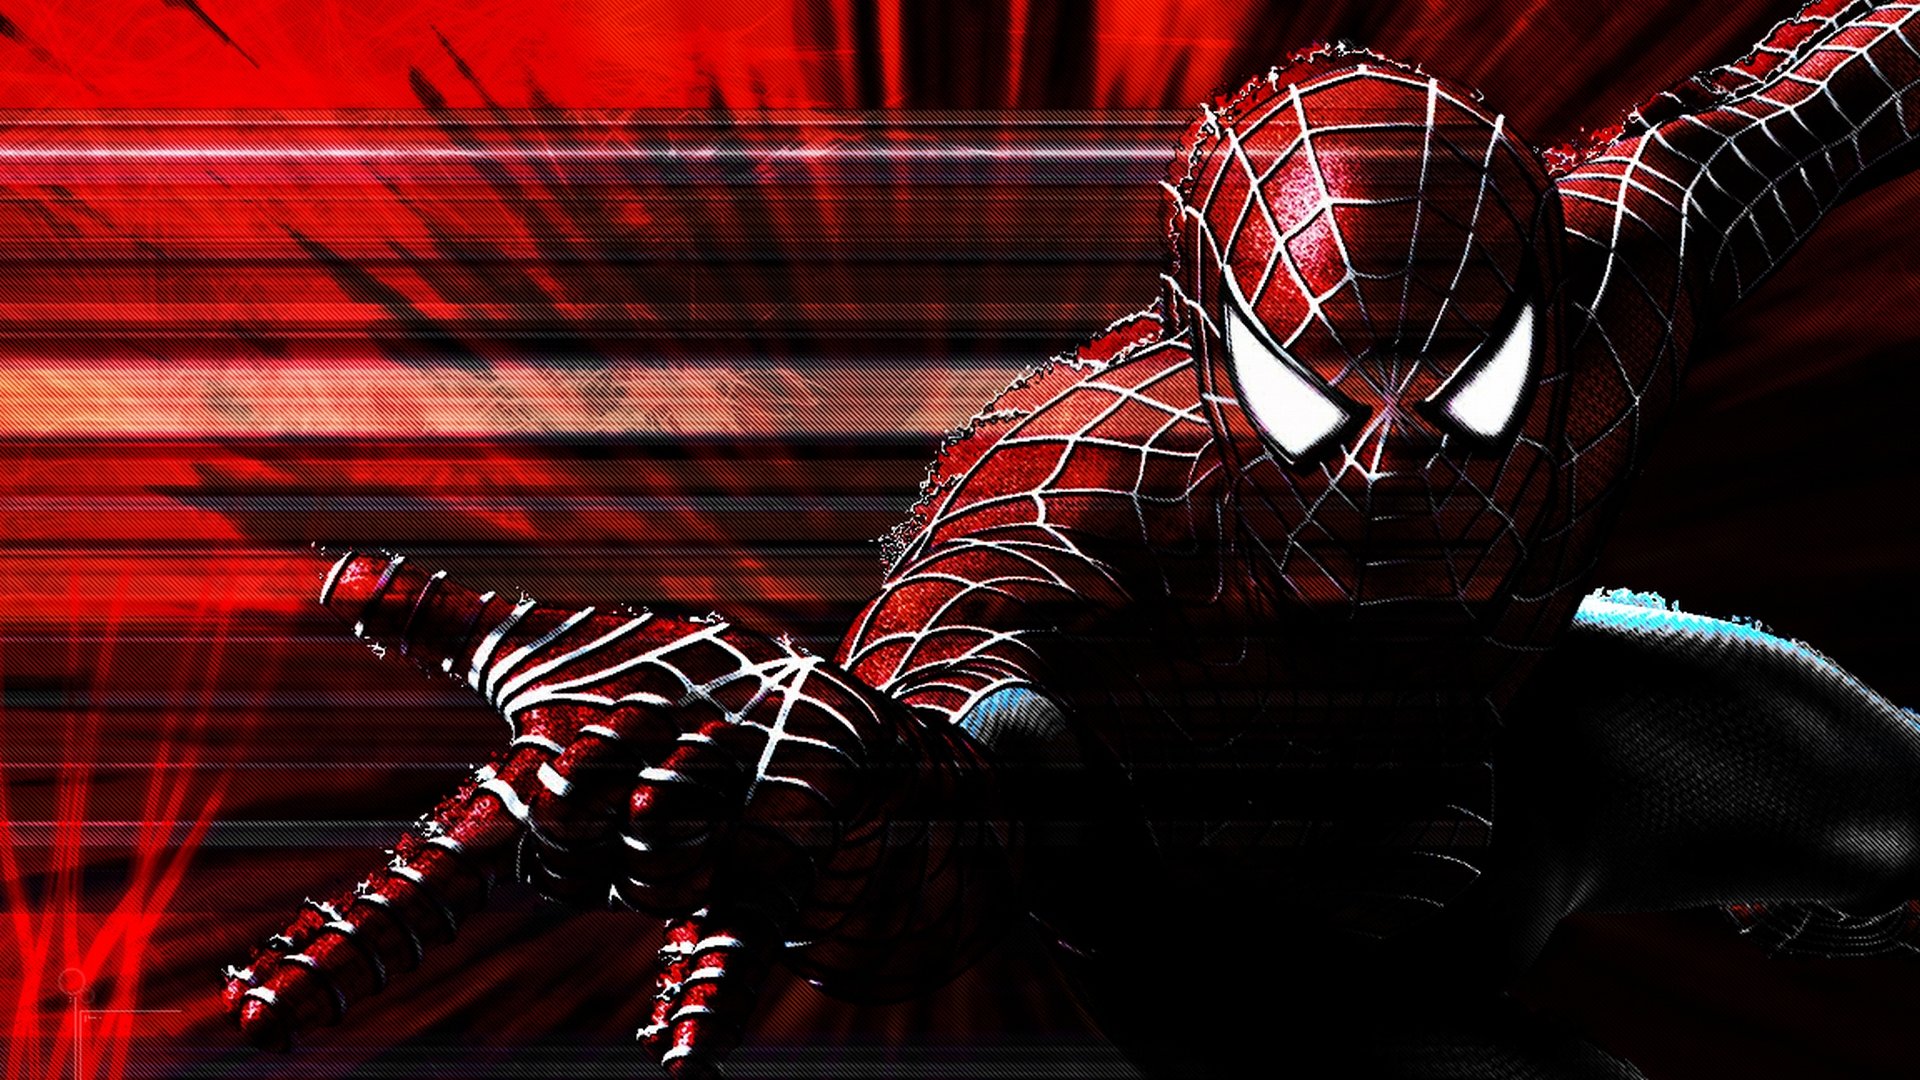 Best Spider-Man Movie wallpaper ID:196096 for High Resolution full hd 1080p PC